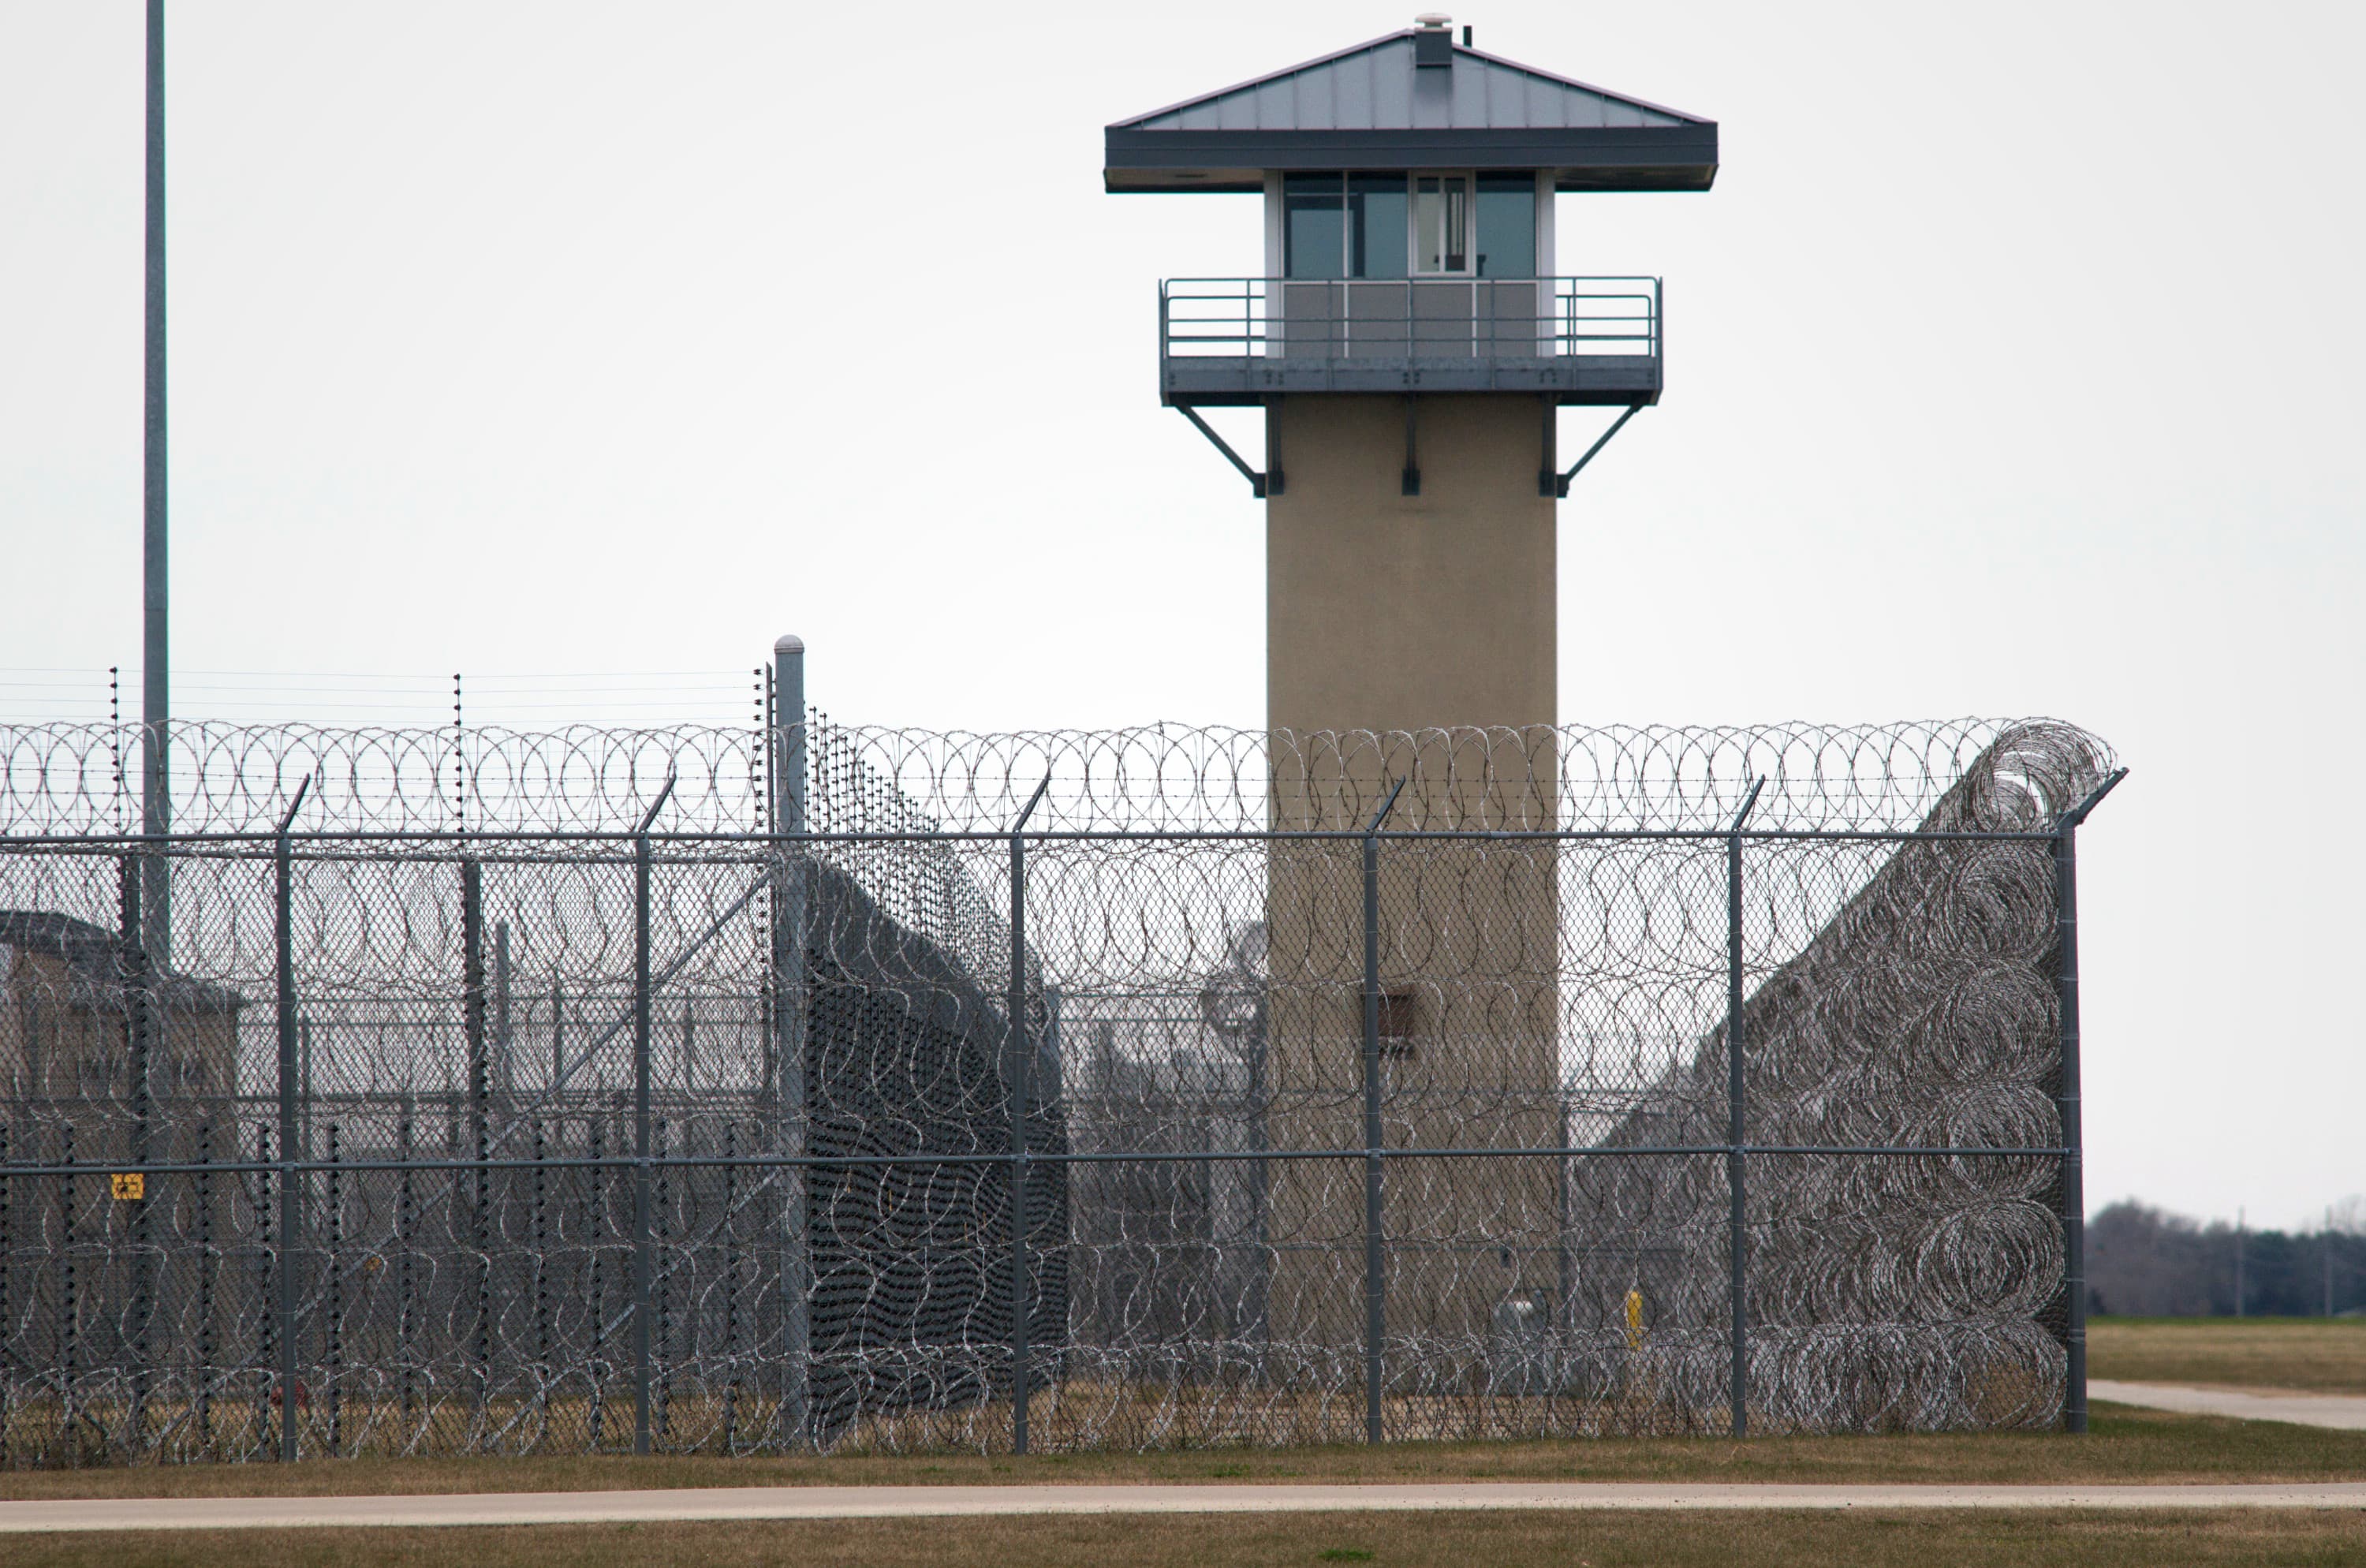 The murky math of counting prison escapes